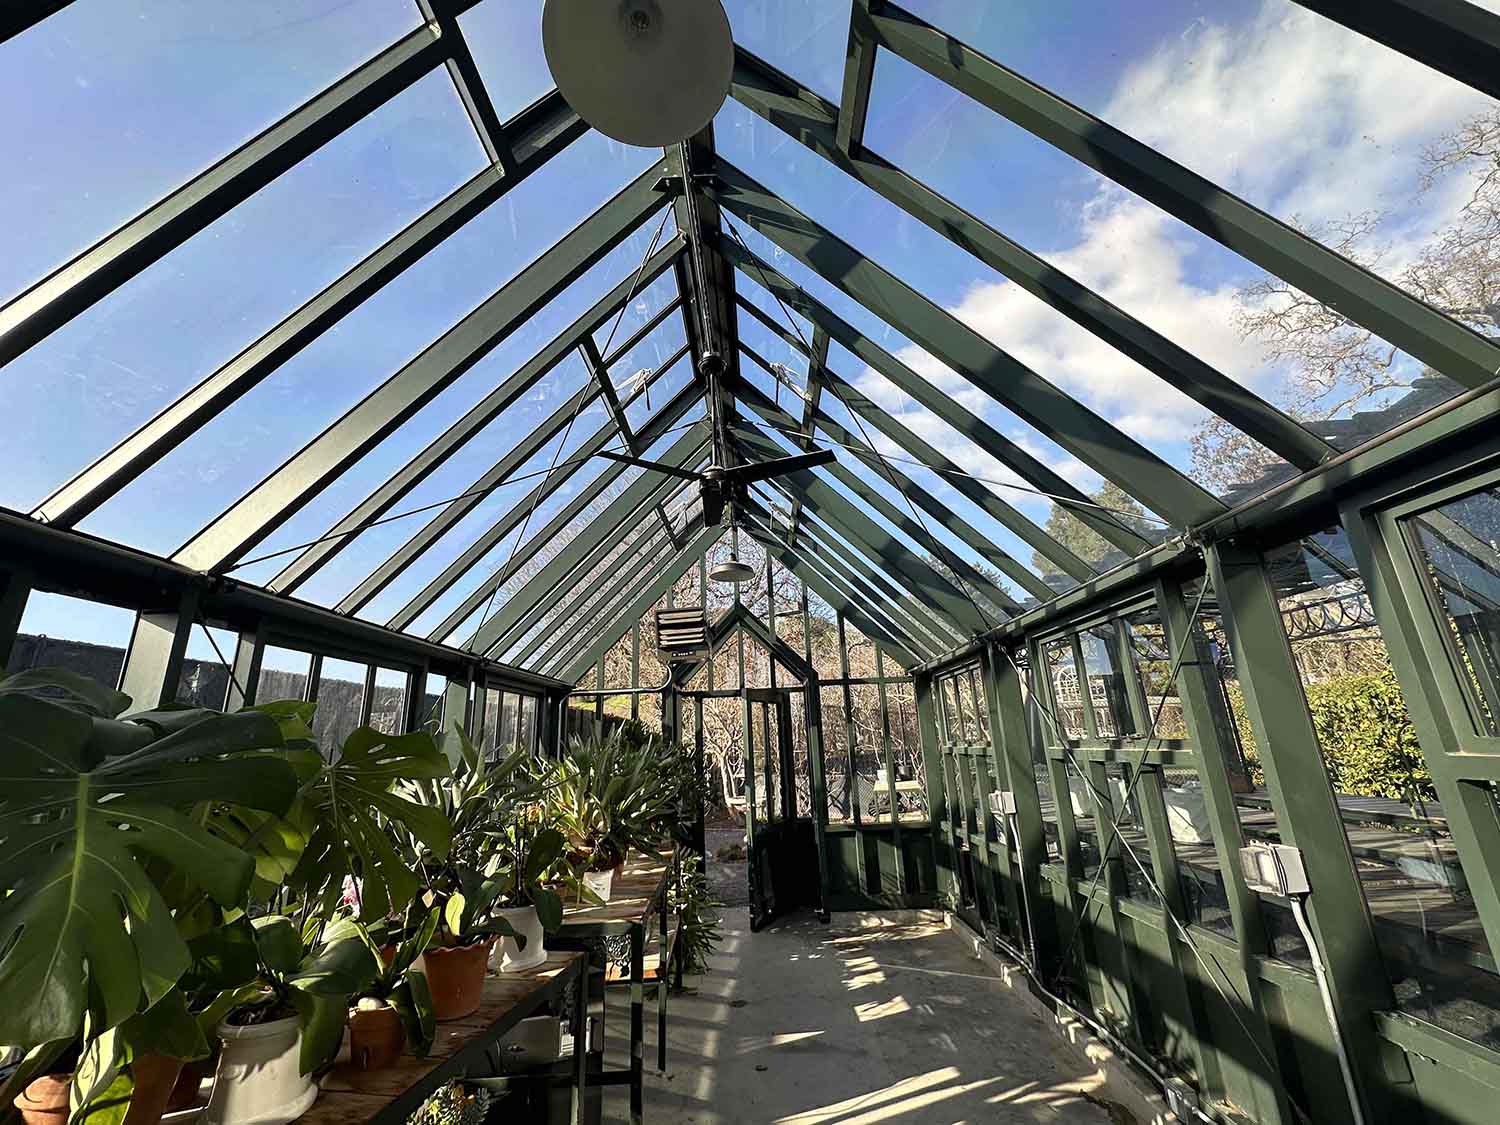 ClimatePro Installs 3M Window Film In A Yountville, CA Greenhouse